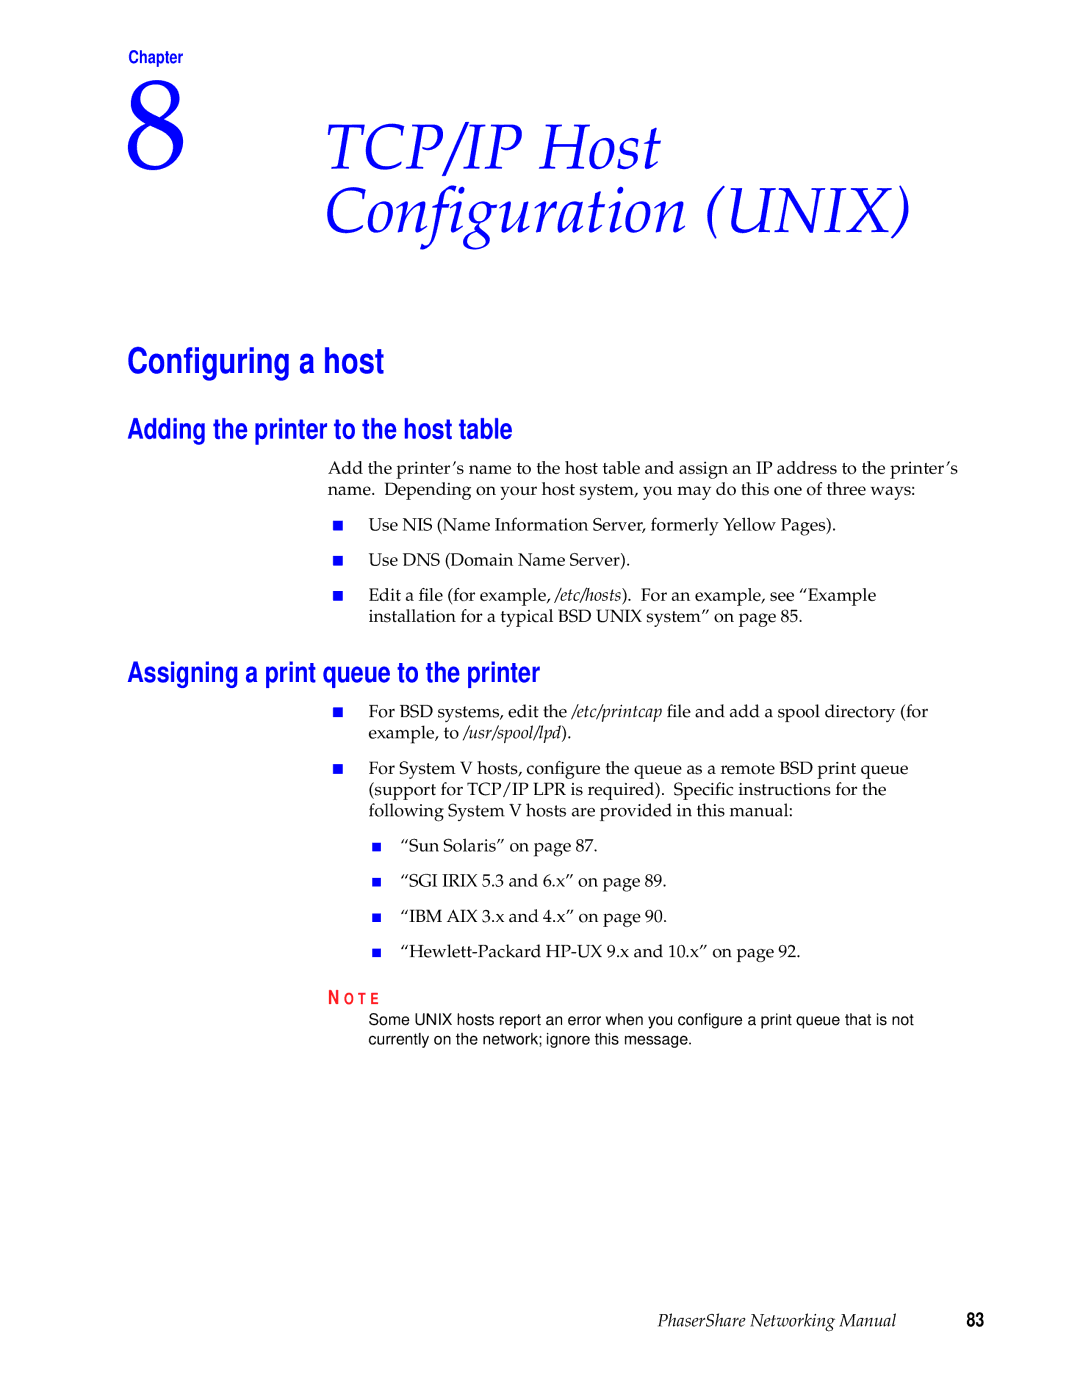 Xerox 840, 780, 360 manual TCP/IP Host Configuration Unix, Conﬁguring a host, Adding the printer to the host table 